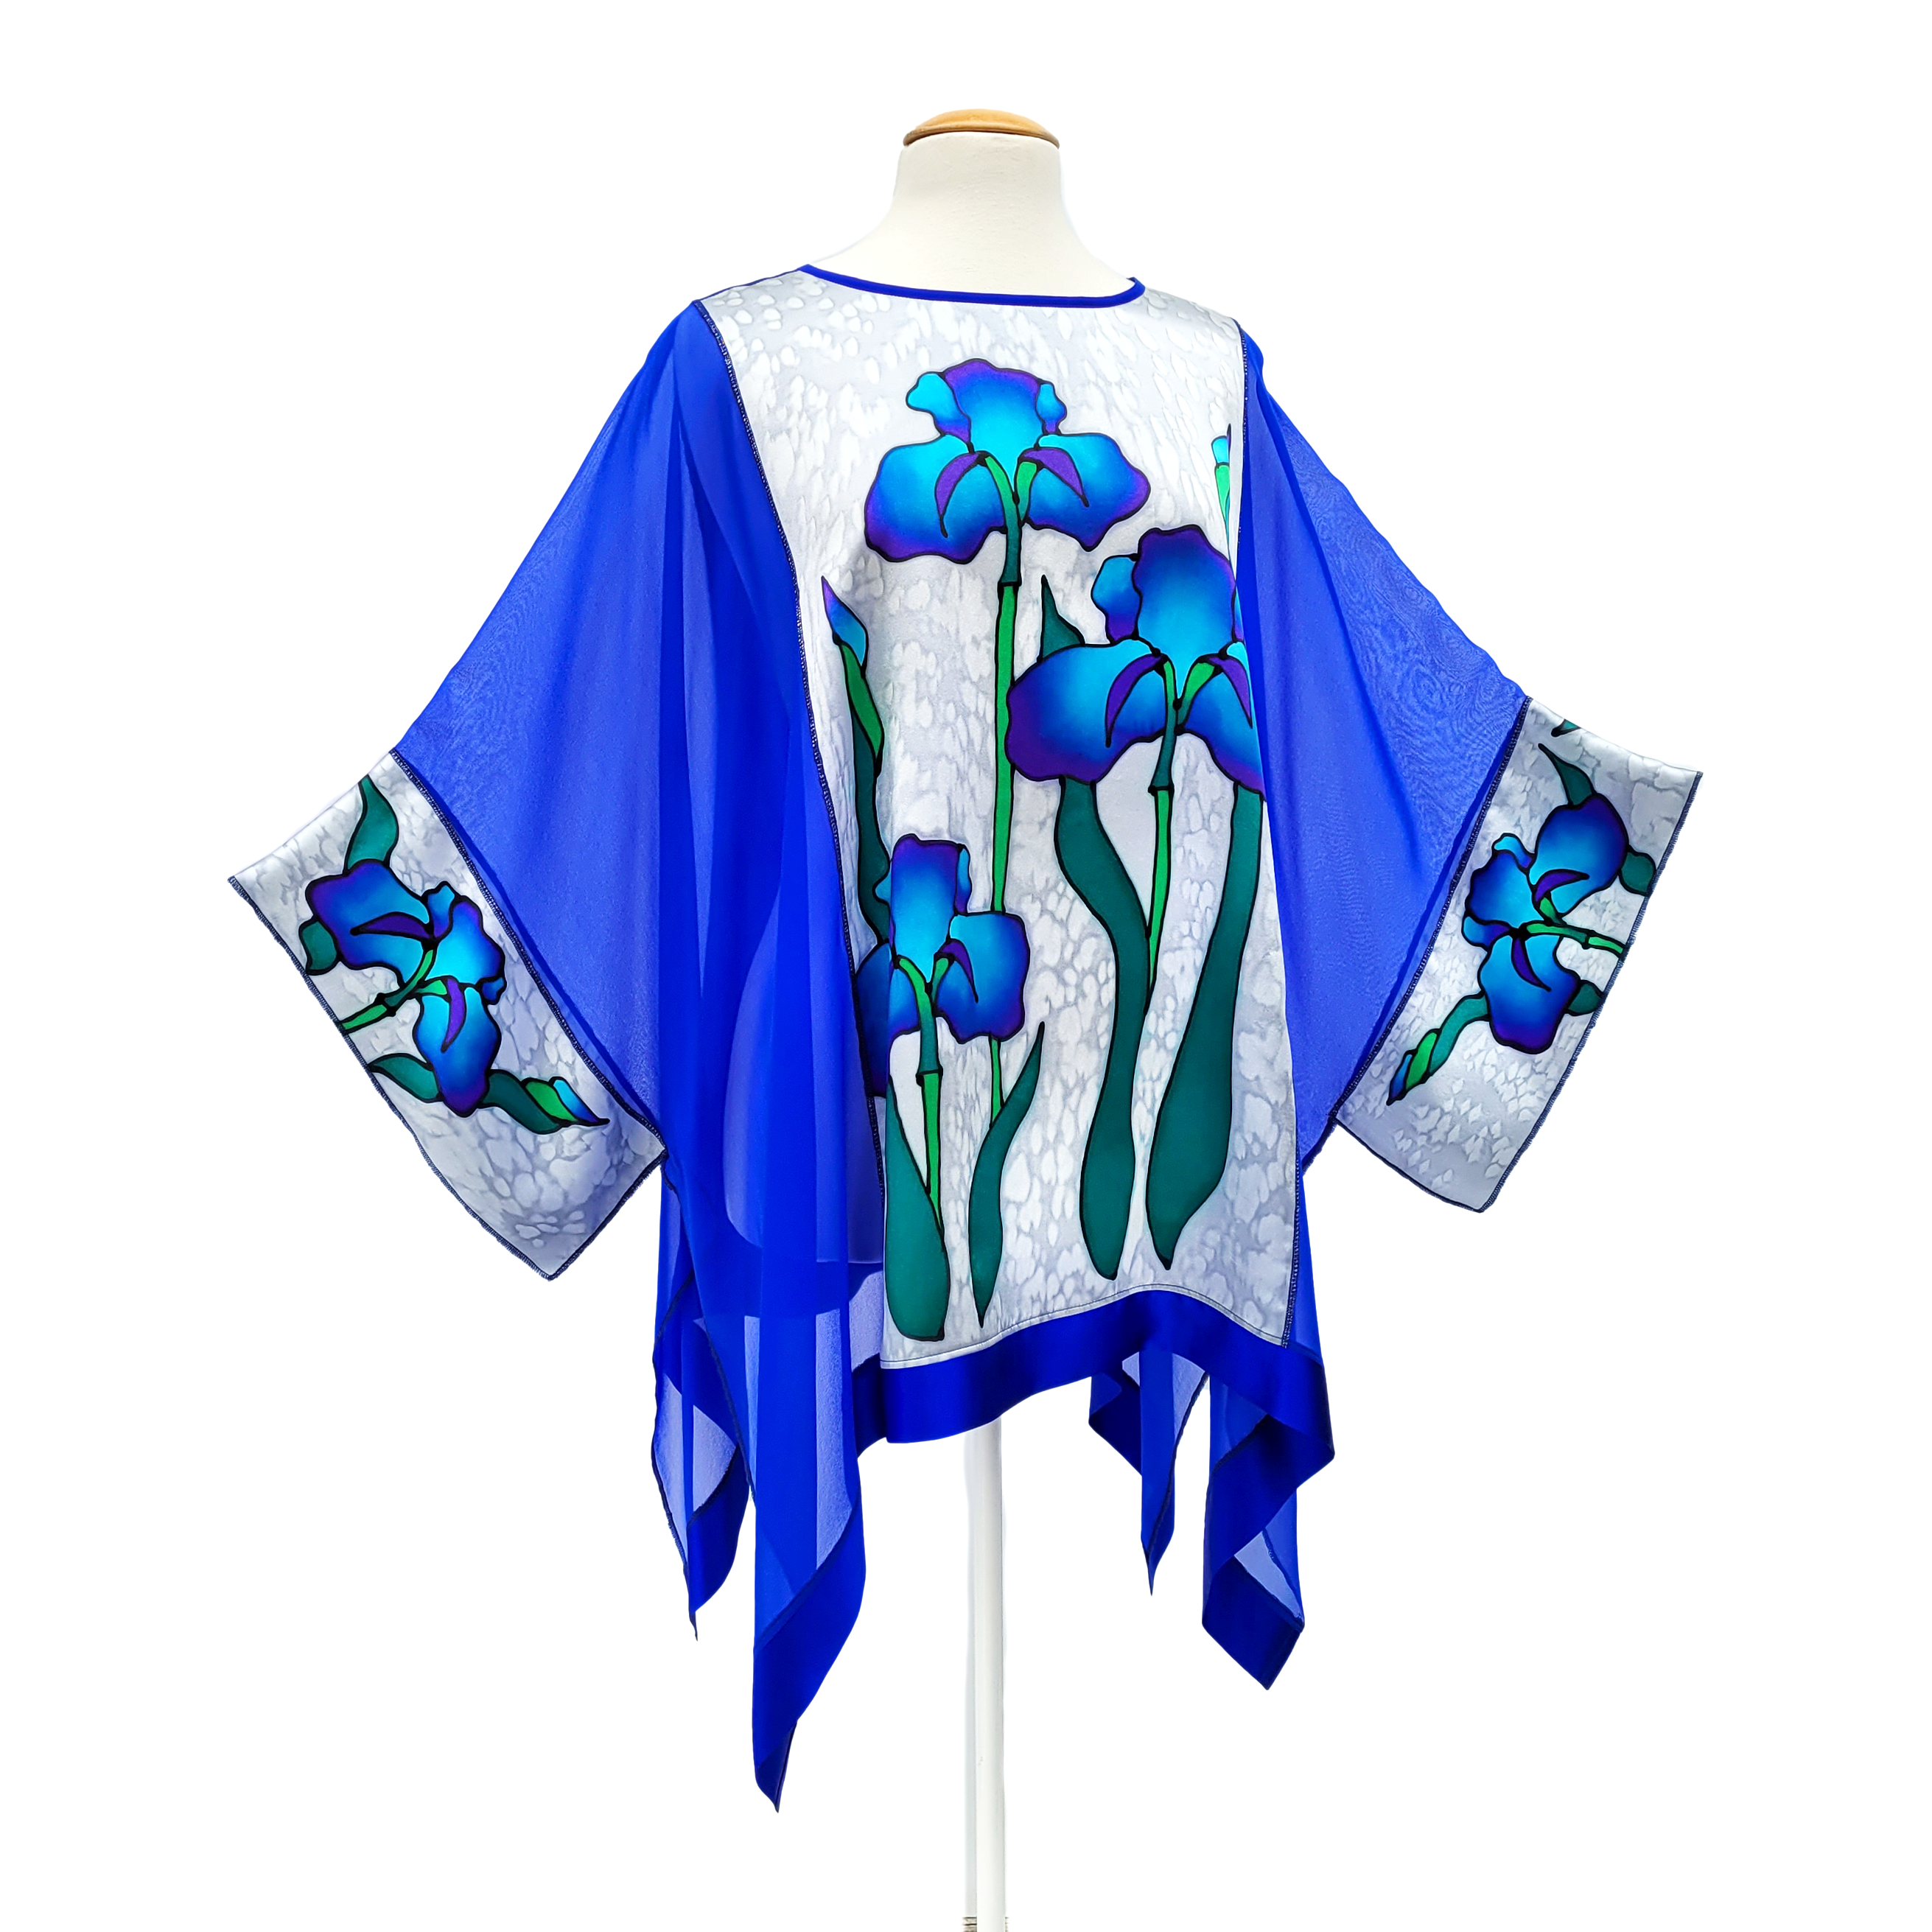 pure silk one size ladies top caftan style hand painted iris art design silver and royal blue colors handmade by Lynne Kiel